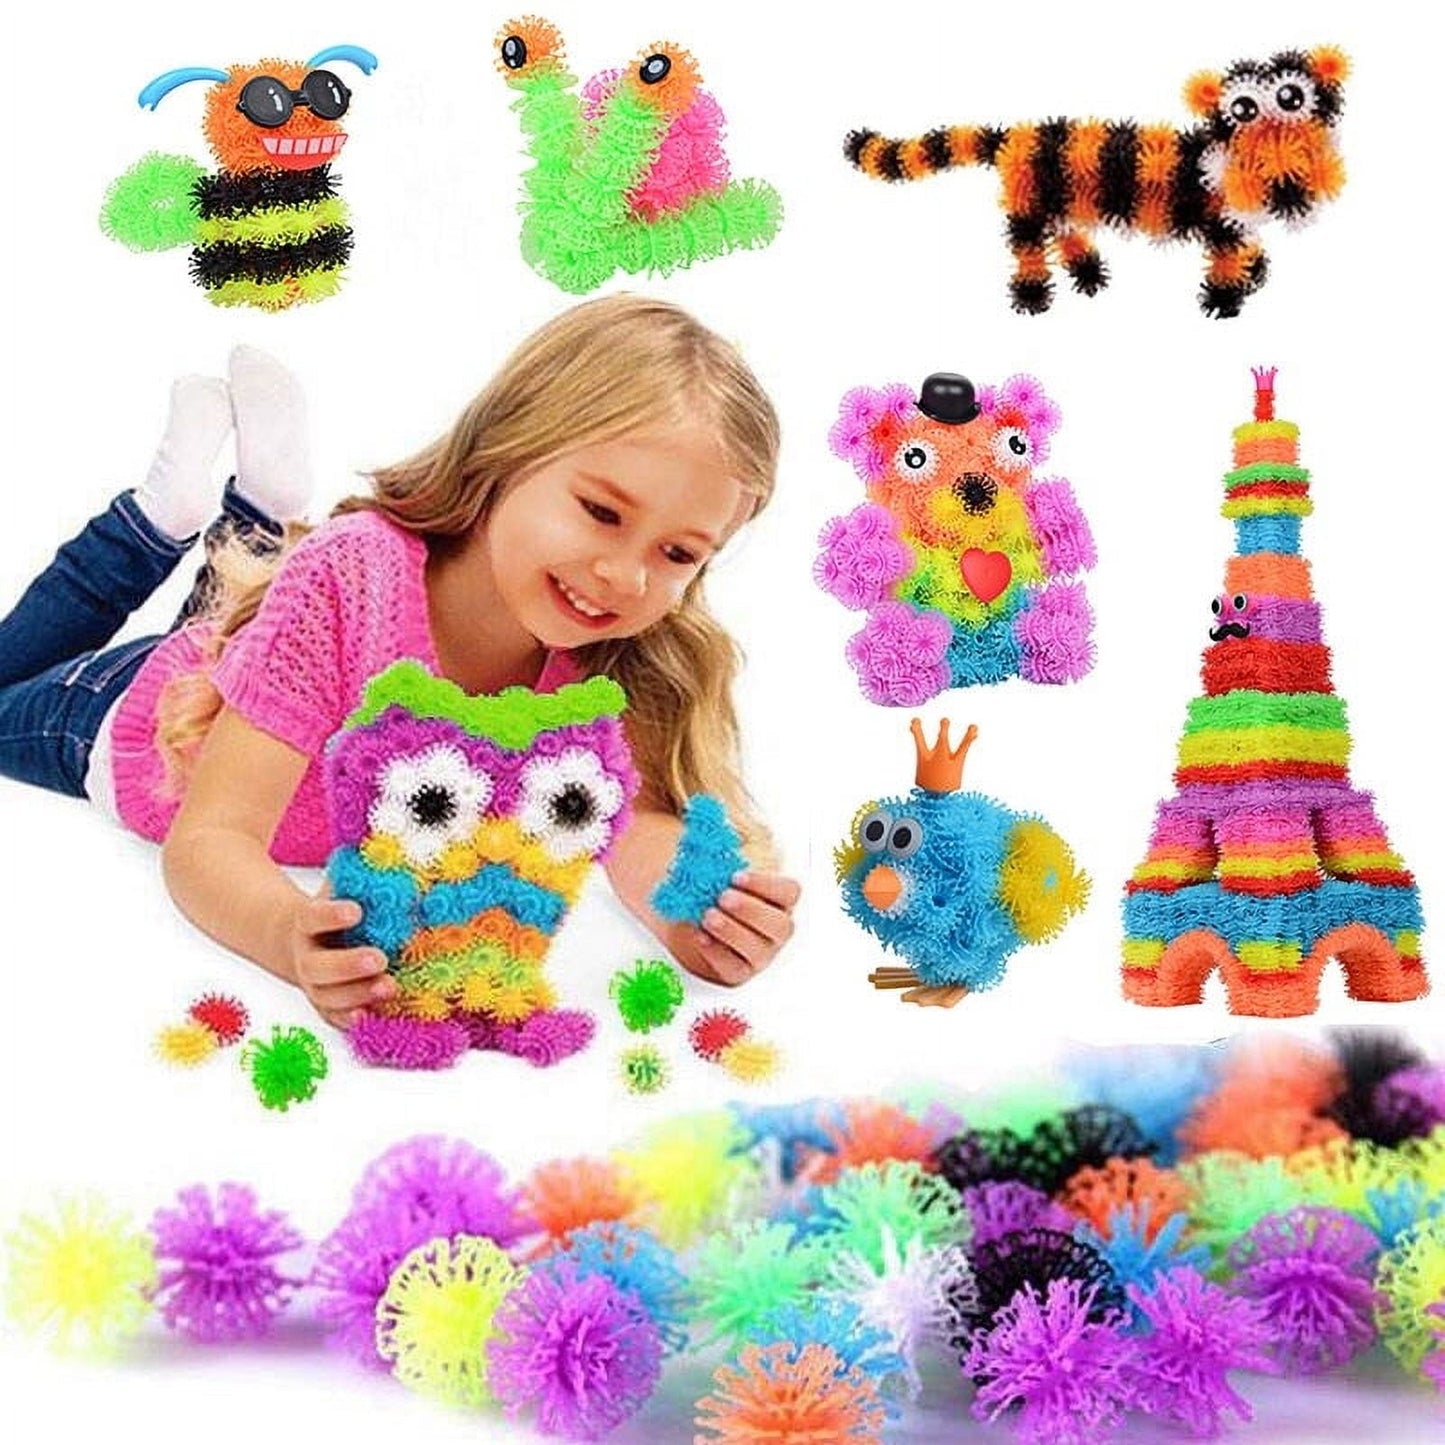 Art Puff - Thorn Ball Clusters 3D Model Construction DIY Building Blocks Toy